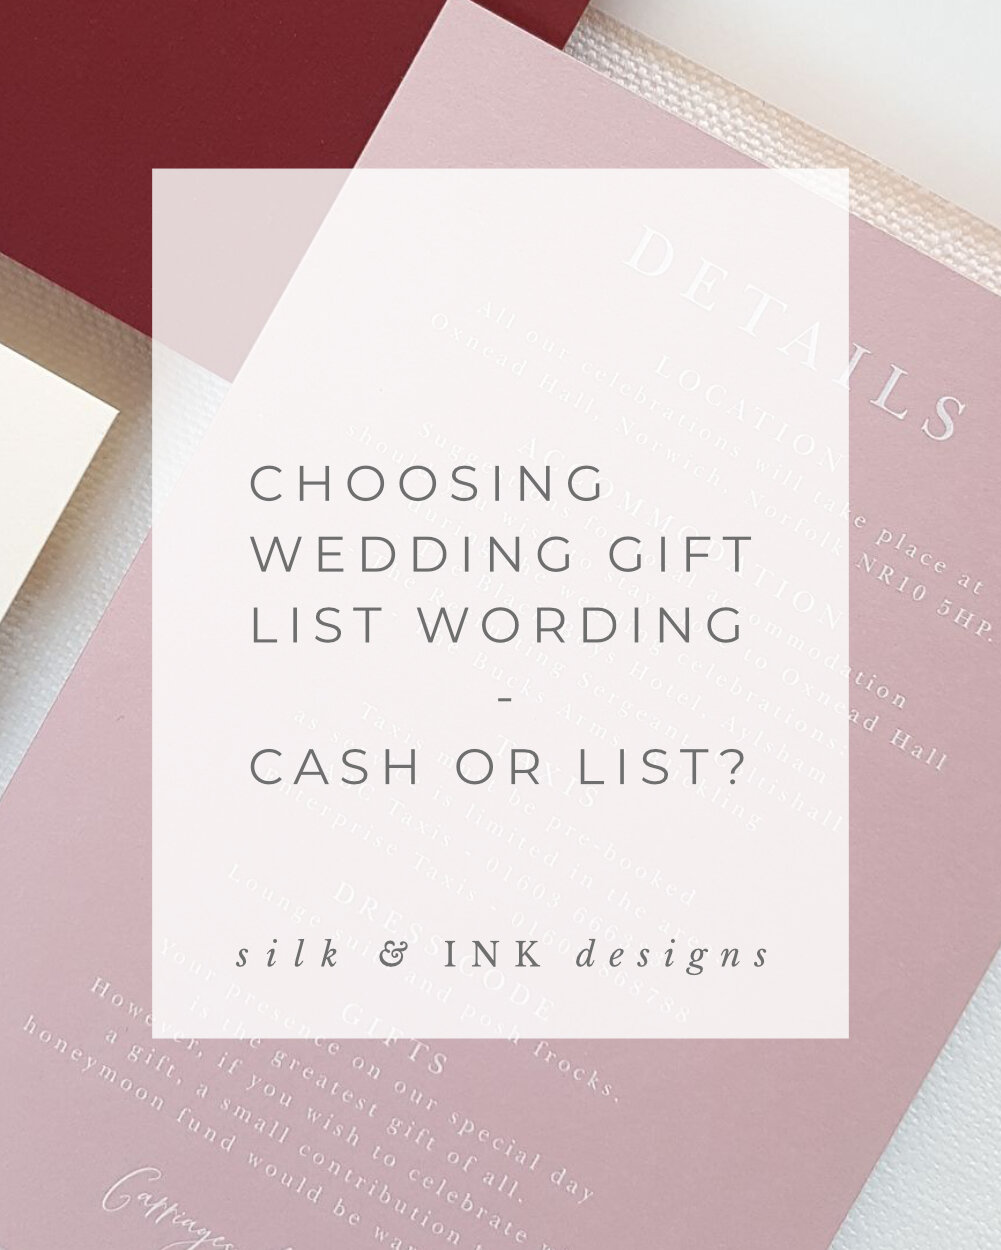 A step by step guide to create a wishlist of wedding gifts  Users blog